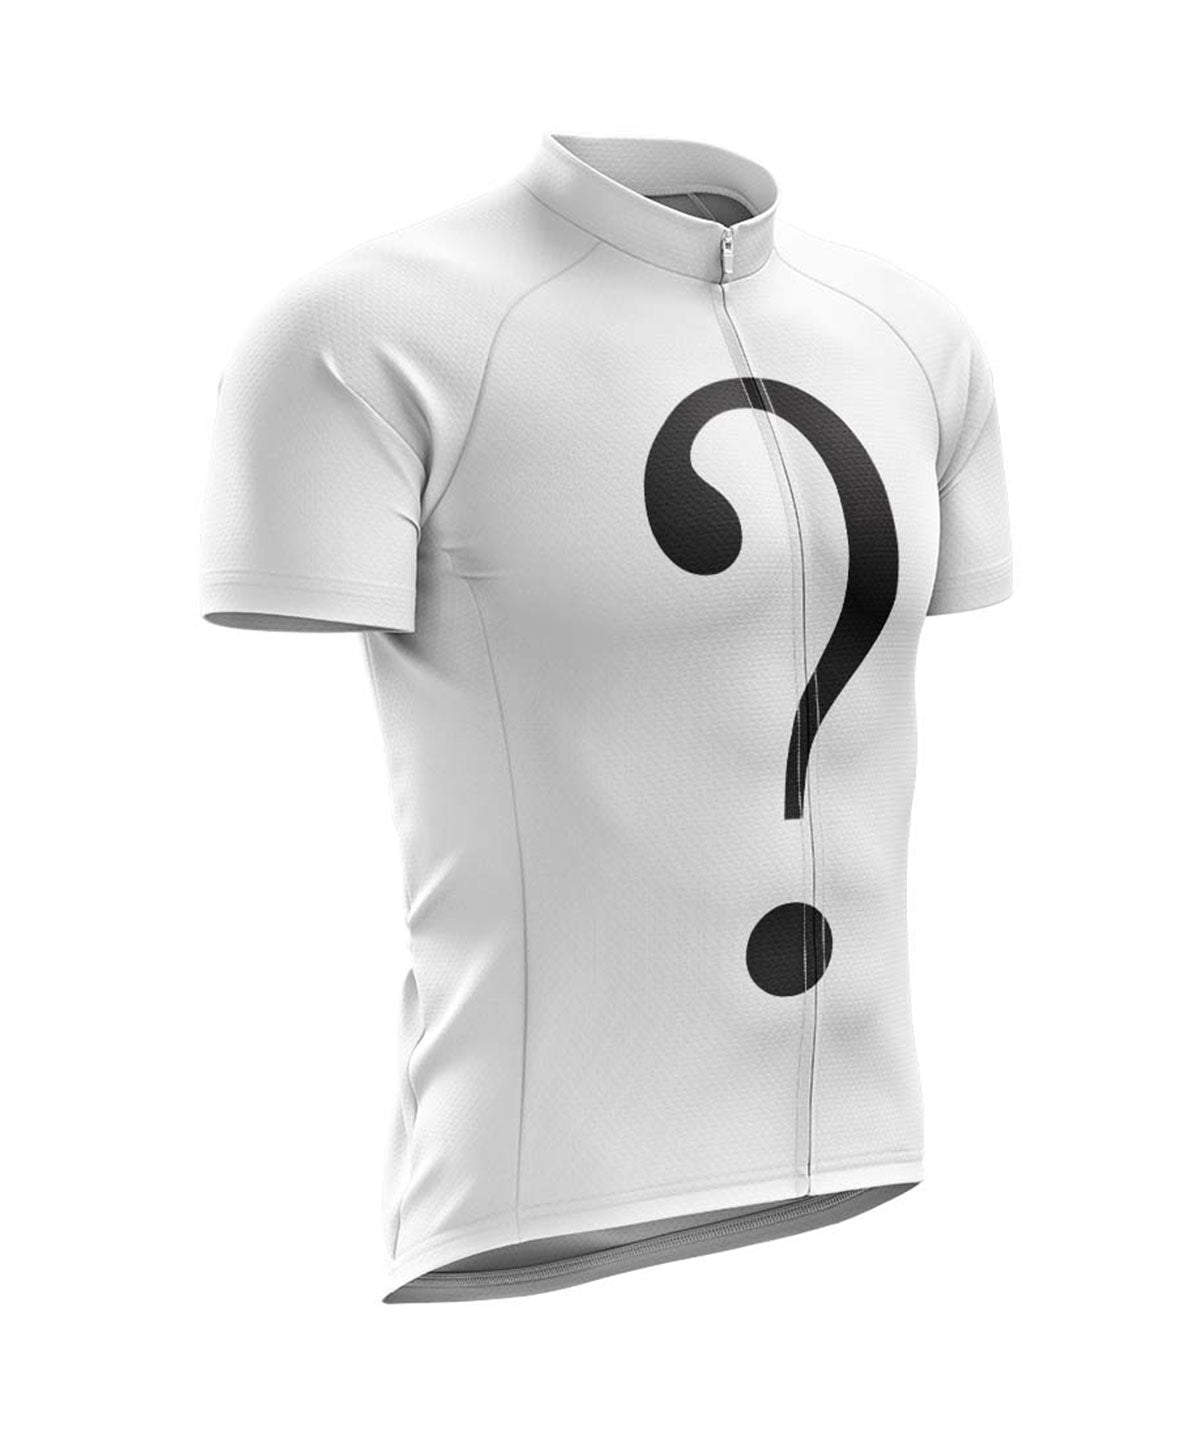 M'S CLUB FIT JERSEY - MYSTERY DESIGN